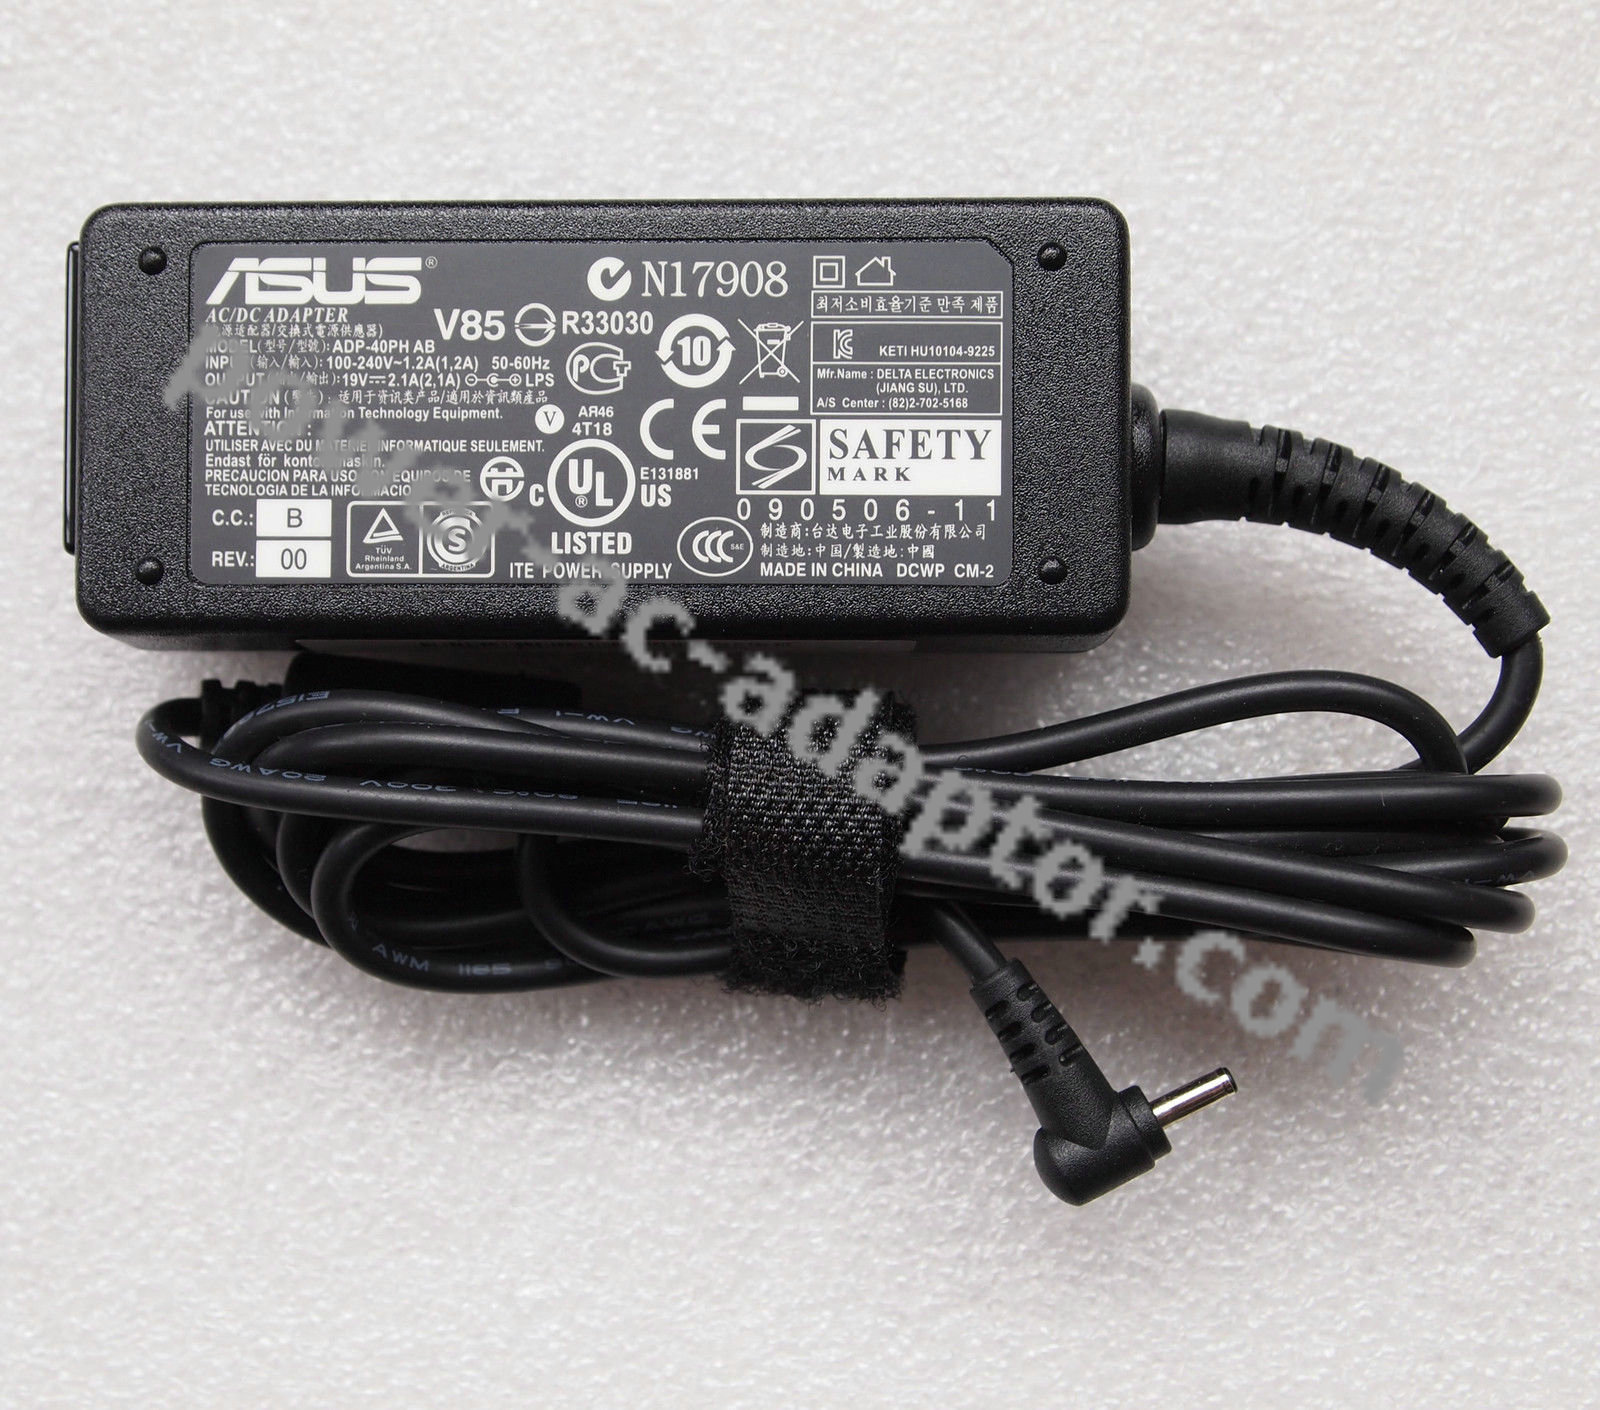 40W ASUS Eee PC 1001HA 1001P 1001PX 1008P AC Power Adapter for